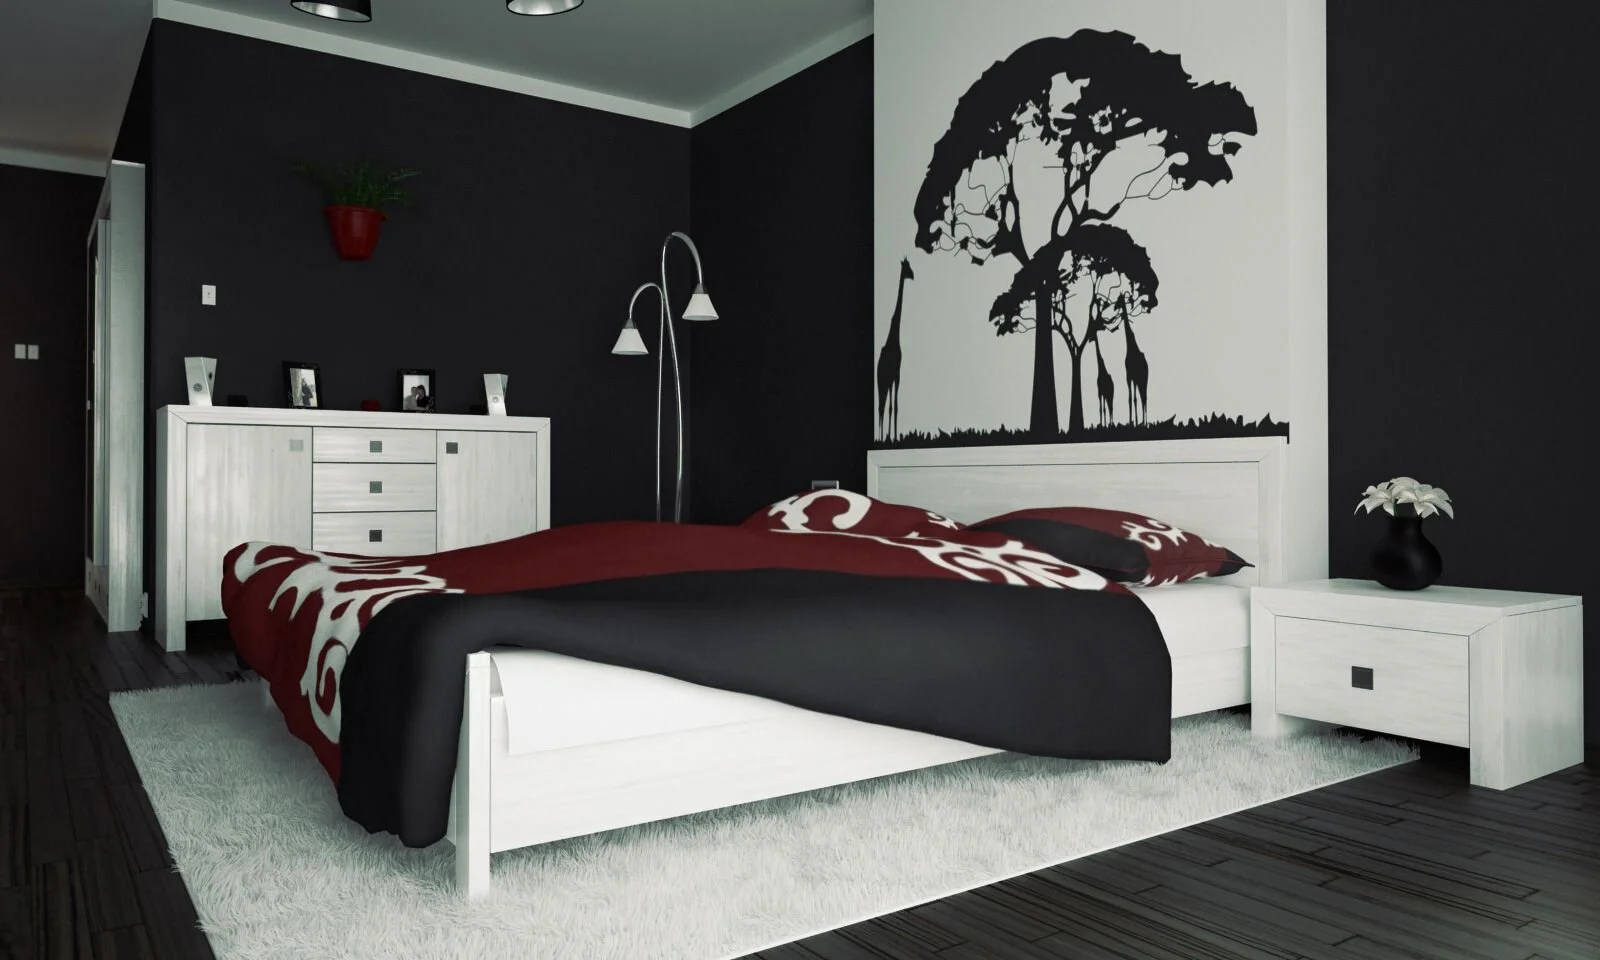 Black Walls And White Bedding Combined With Red Touch For Modern Bedroom Idea Within Waking Imagination In Creating Creations Bedroom Design Ideas Black And White